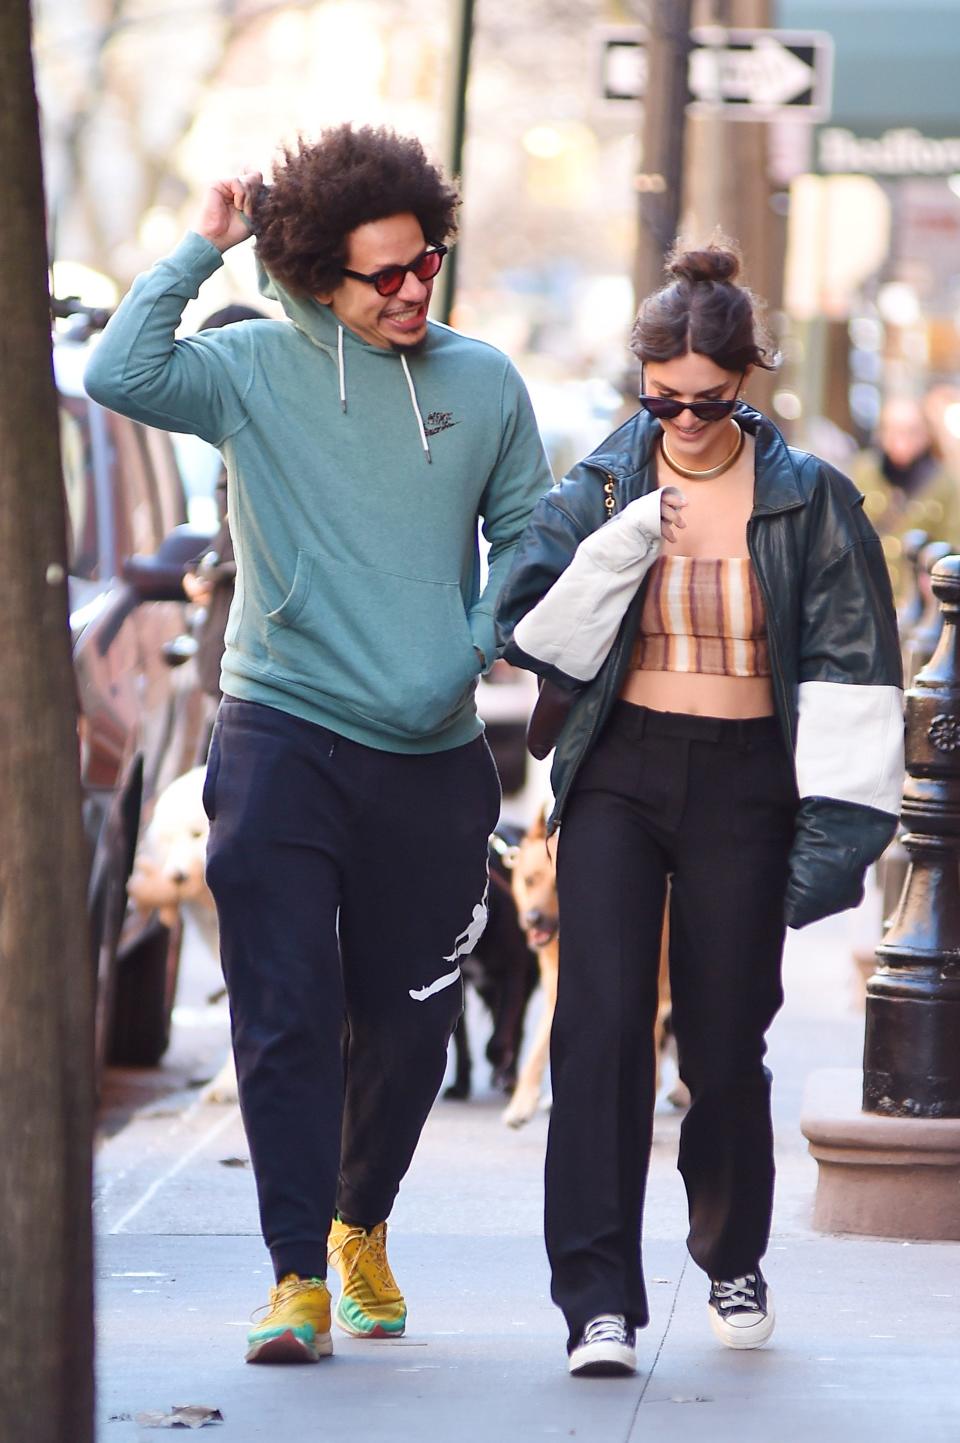 Emily Ratajkowski and Eric Andre are seen out and about on February 10, 2023 in New York, New York.